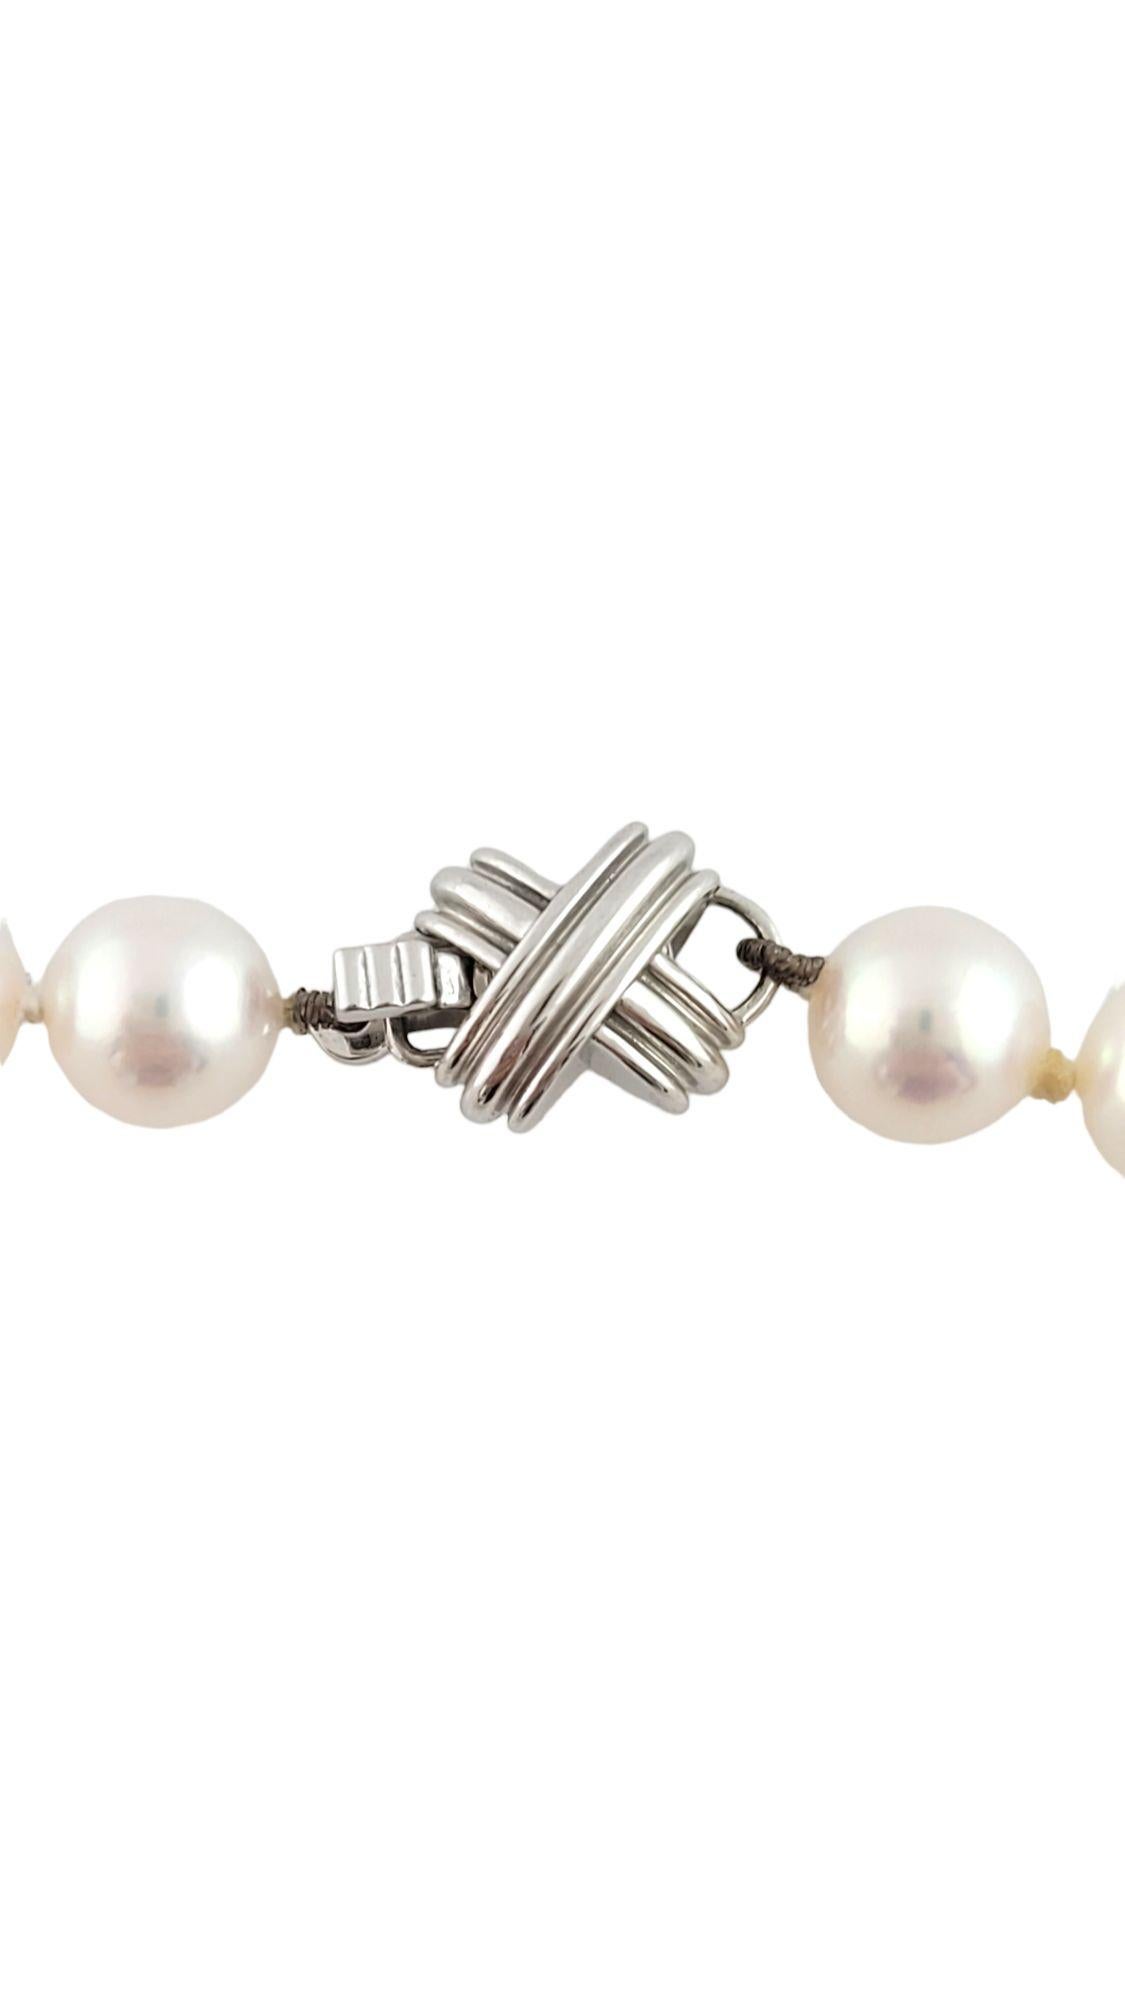 Vintage Tiffany & Co. 18K White Gold Pearl Necklace

Gorgeous 18K white gold Tiffany necklace with 58 beautiful pearls!

Pearls approximately 7.2mm each. White with a pink hue

Length: 18.5